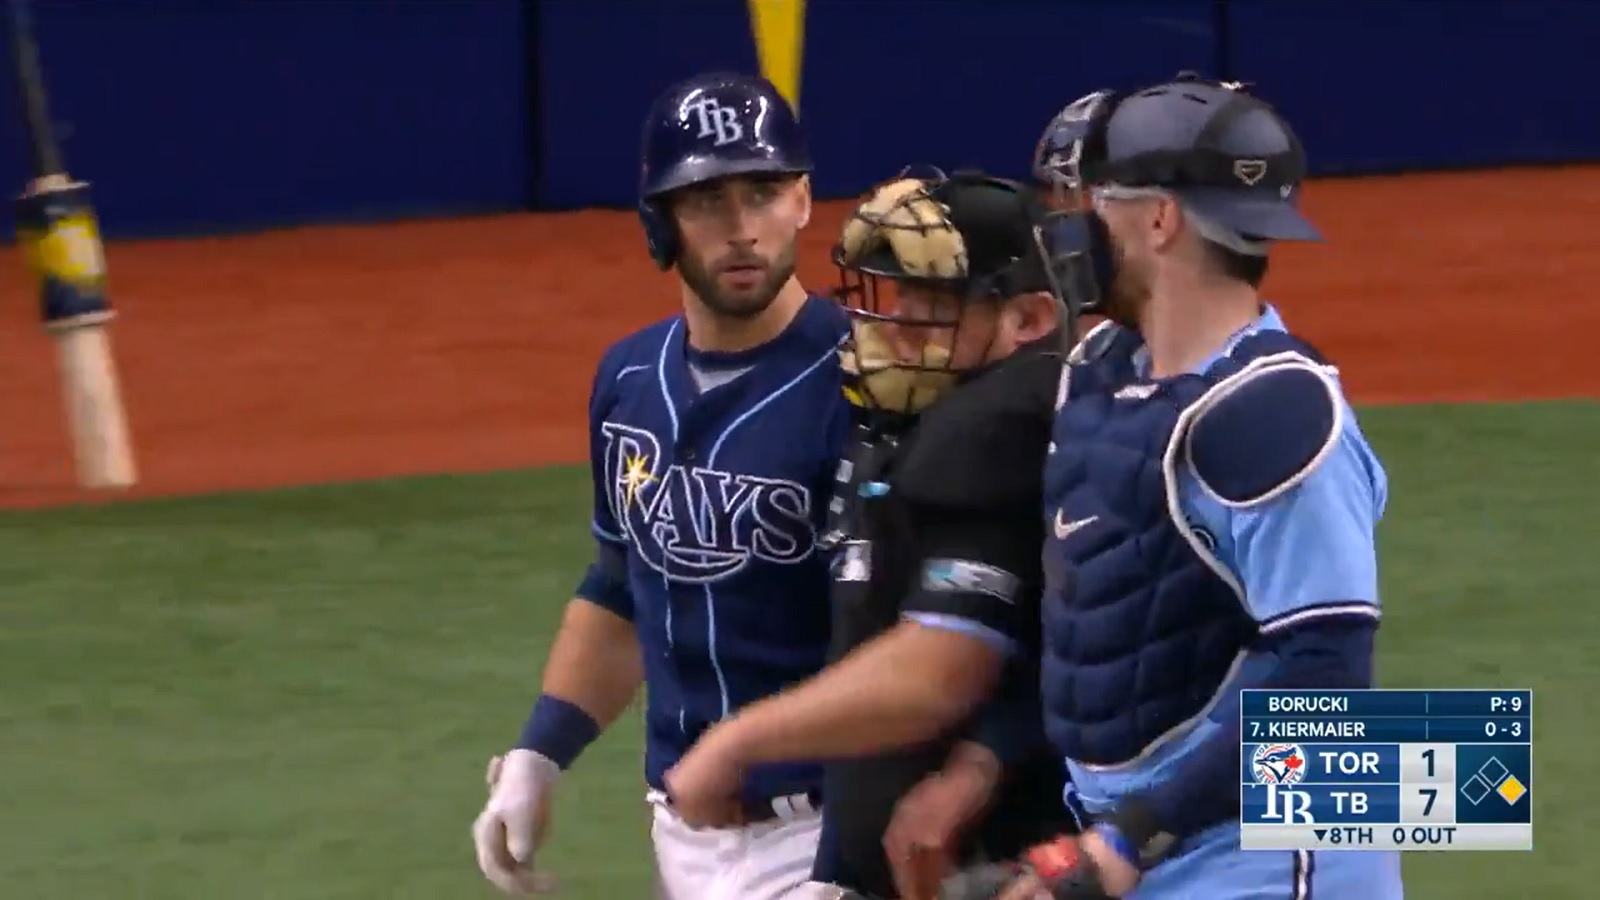 Rays-Blue Jays benches clear after Kevin Kiermaier plunked